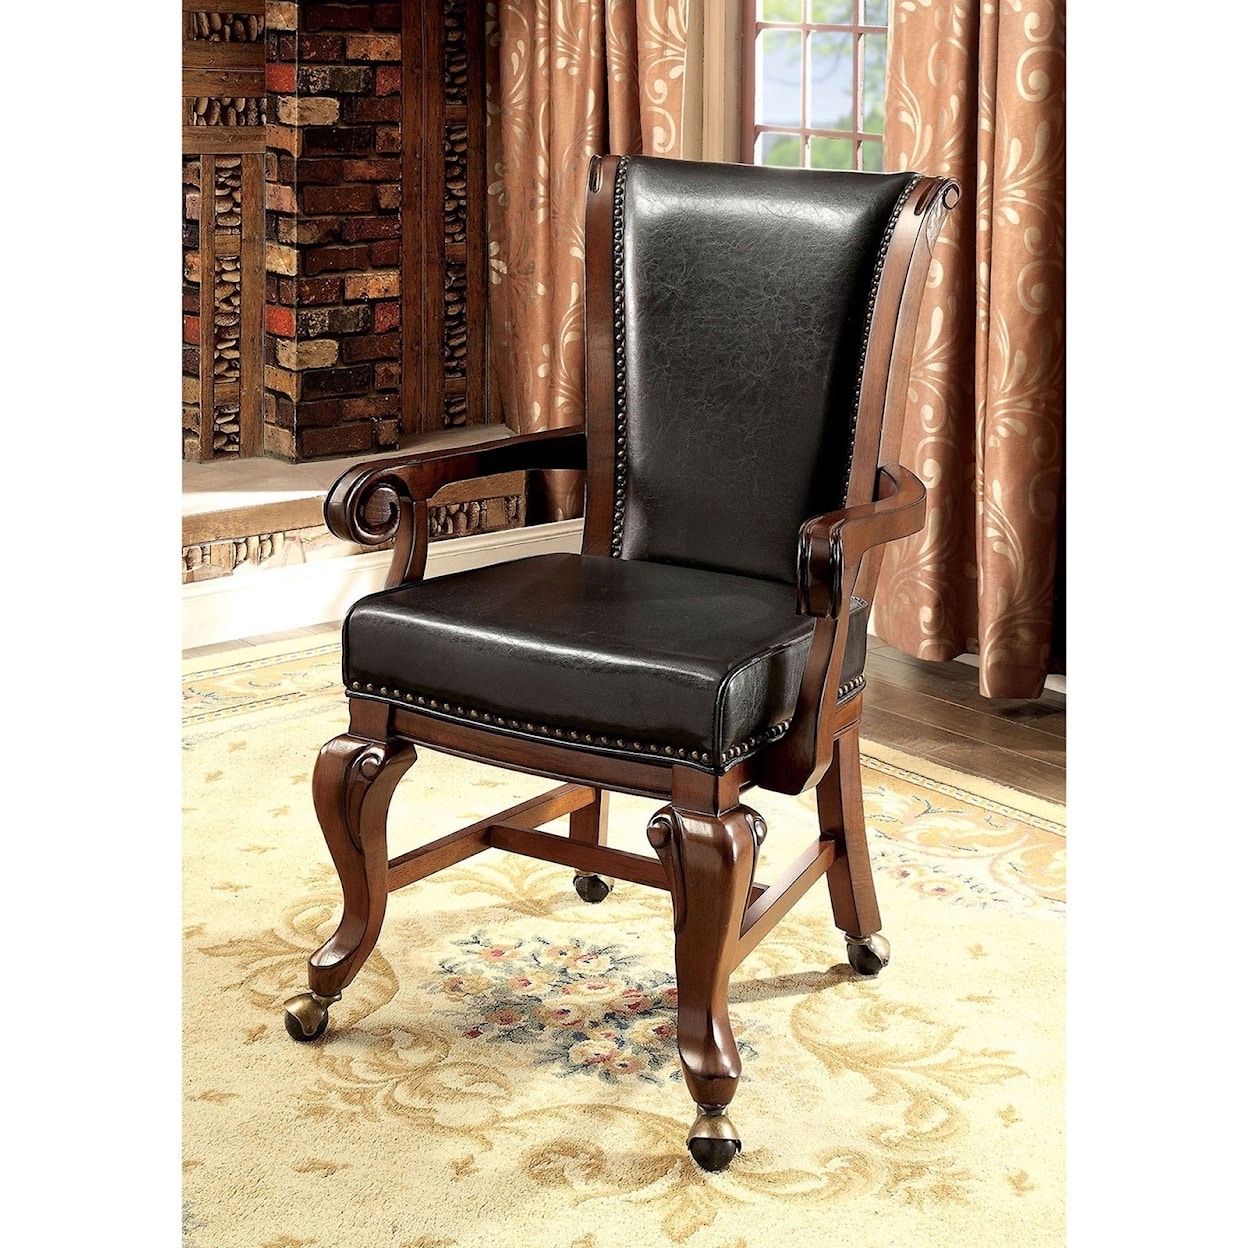 Furniture of America Melina Set of 2 Arm Chairs